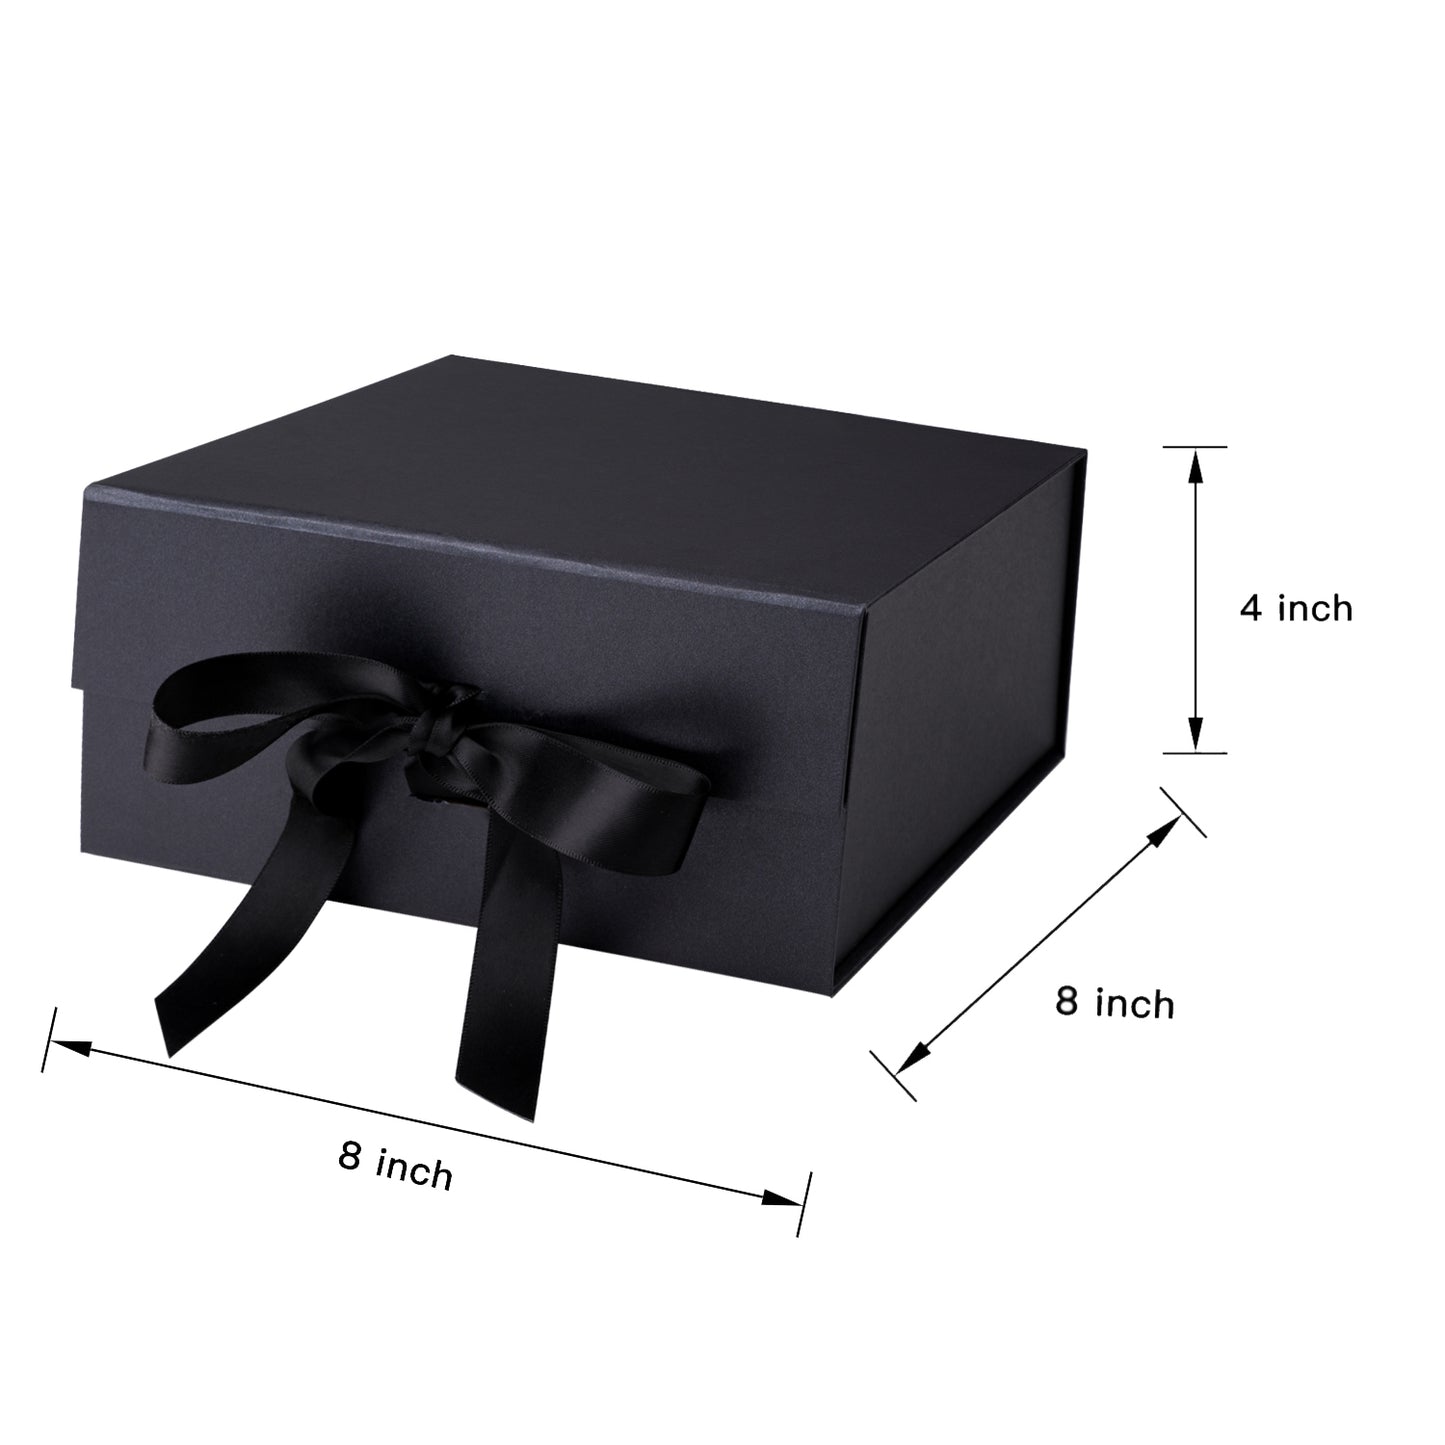 WRAPLA Black Gift Box with Satin Ribbon, 20X20X10CM Collapsible Gift Box with Magnetic Closure for Party, Wedding, Gift Wrap, Bridesmaid Proposal, Storage